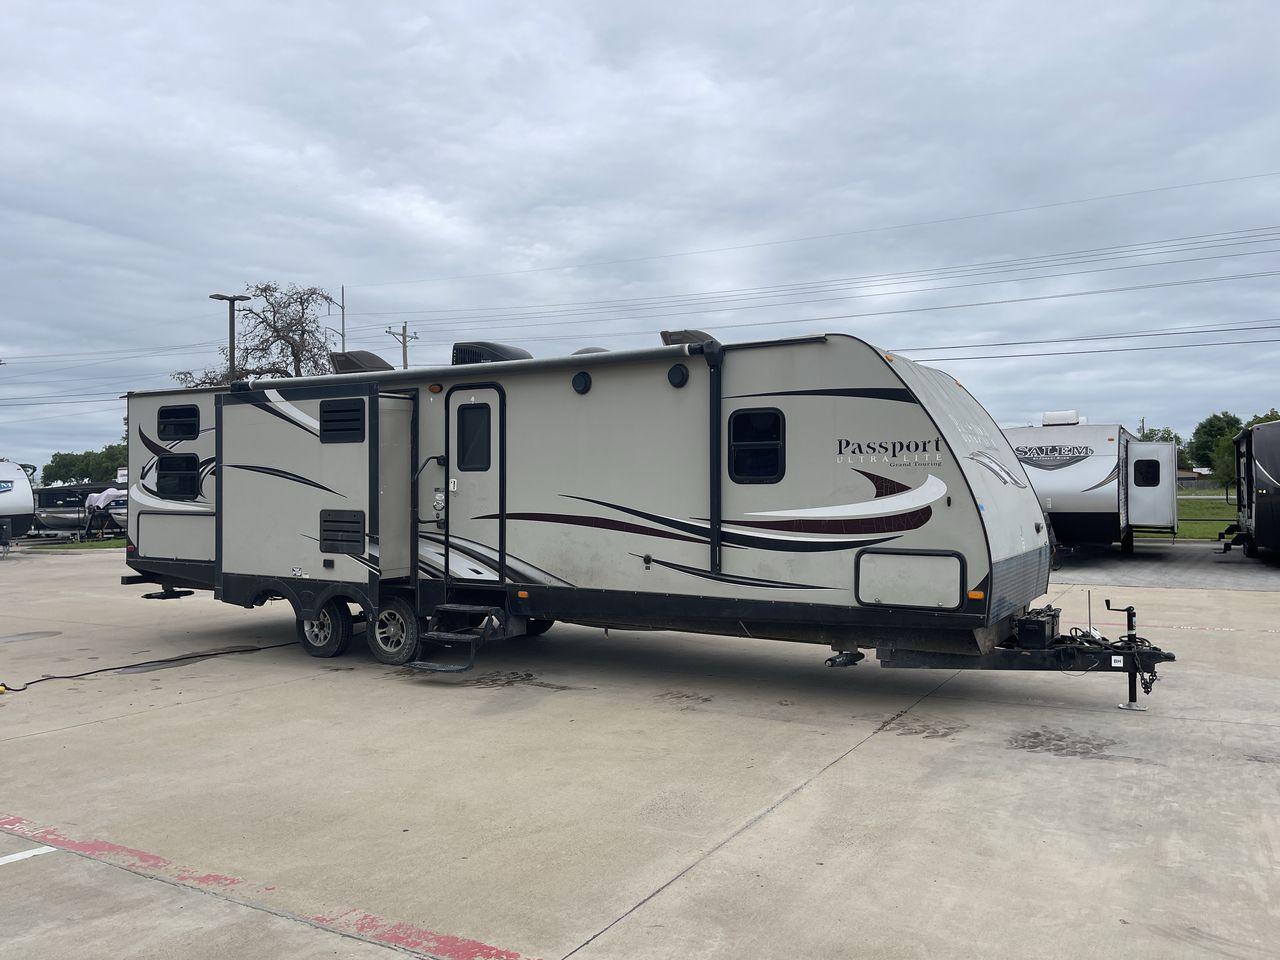 2015 WHITE KEYSTONE PASSPORT 3320 BH - (4YDT33229FT) , Length: 36.83 ft. | Dry Weight: 6,590 lbs. | Gross Weight: 8,000 lbs. | Slides: 3 transmission, located at 4319 N Main Street, Cleburne, TX, 76033, (817) 221-0660, 32.435829, -97.384178 - With the 2015 Keystone Passport 3320BH travel trailer, you can easily bring friends along for a fun camping adventure. This unit measures 36.83 ft. in length and 10.92 ft. in height. It has a dry weight of 6,590 lbs. with a payload capacity of 1,410 lbs. The GVWR is about 8,000 lbs, and the hitch we - Photo #47